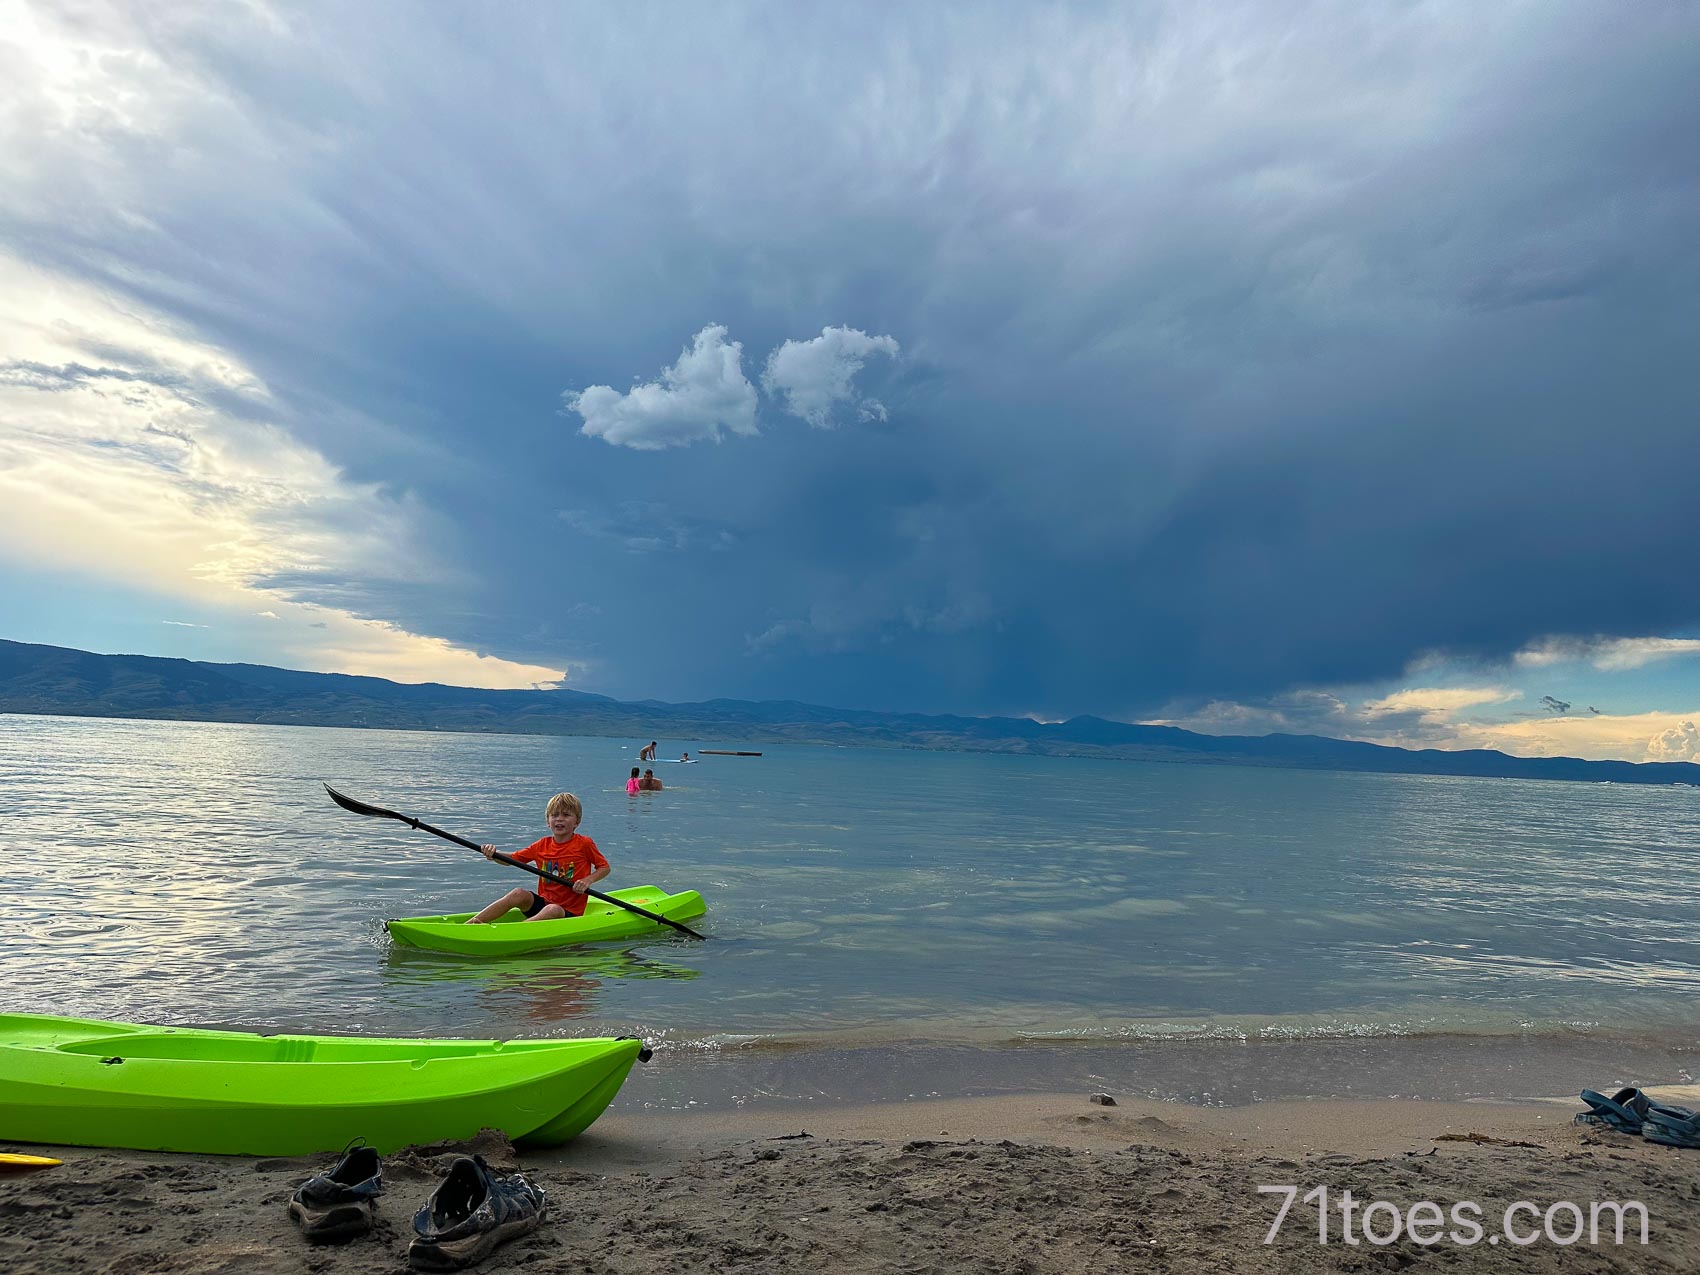 Bear Lake with a storm rolling in.